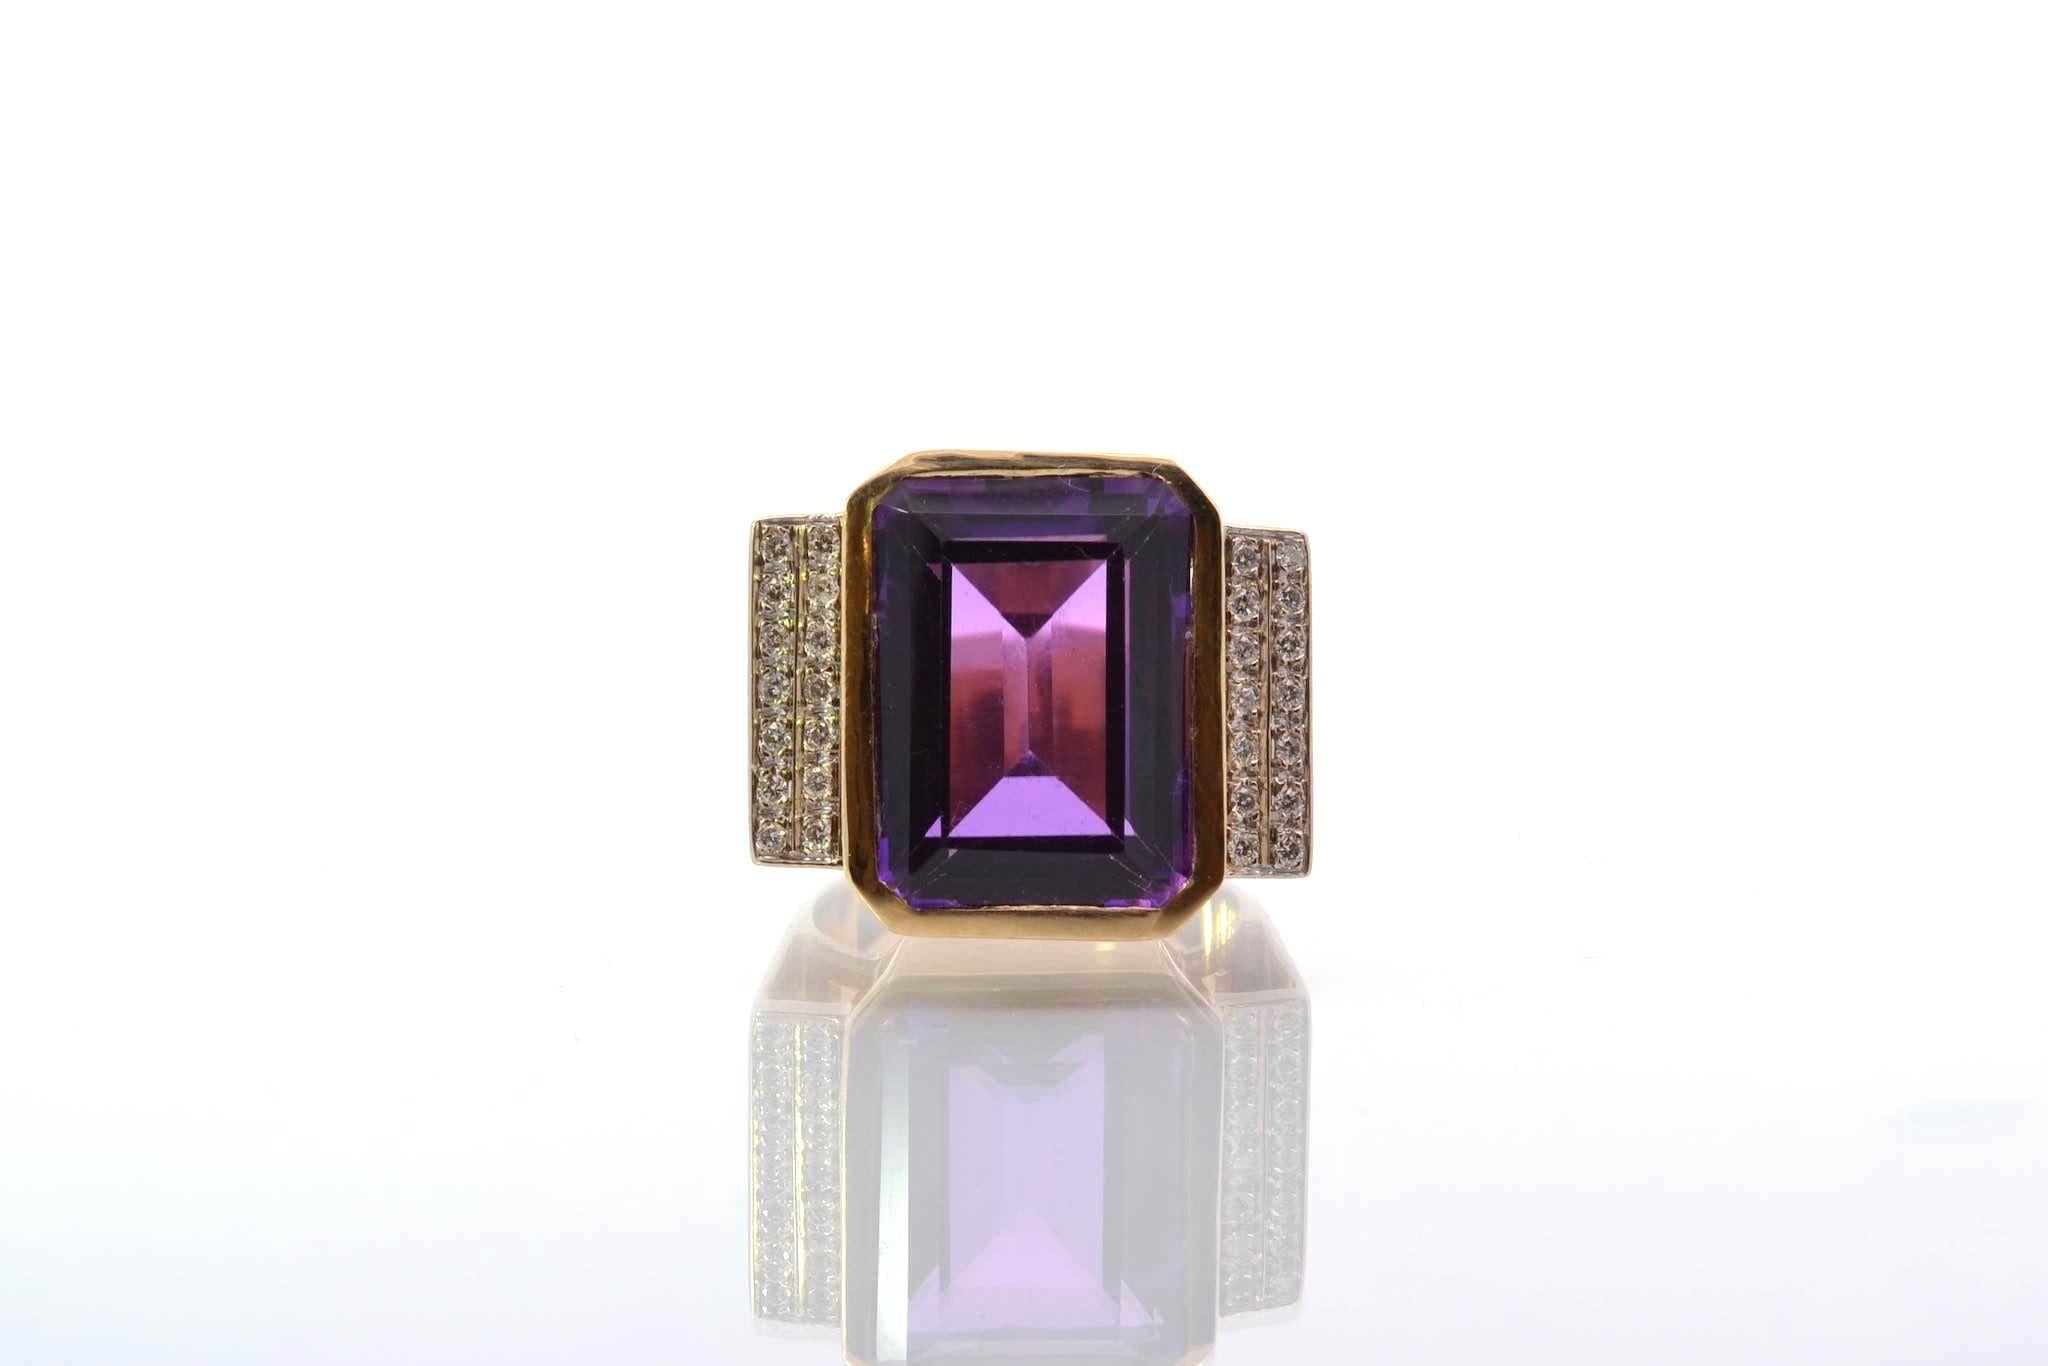 Stones: Amethyst: 19 carats, 21 diamonds: 0.30 carat
Material: 18k yellow gold
Dimensions: 2.3cm x 2cm
Weight: 22.4g
Period: 1970
Size: 56 (free sizing)
Certificate
Ref. : 25299